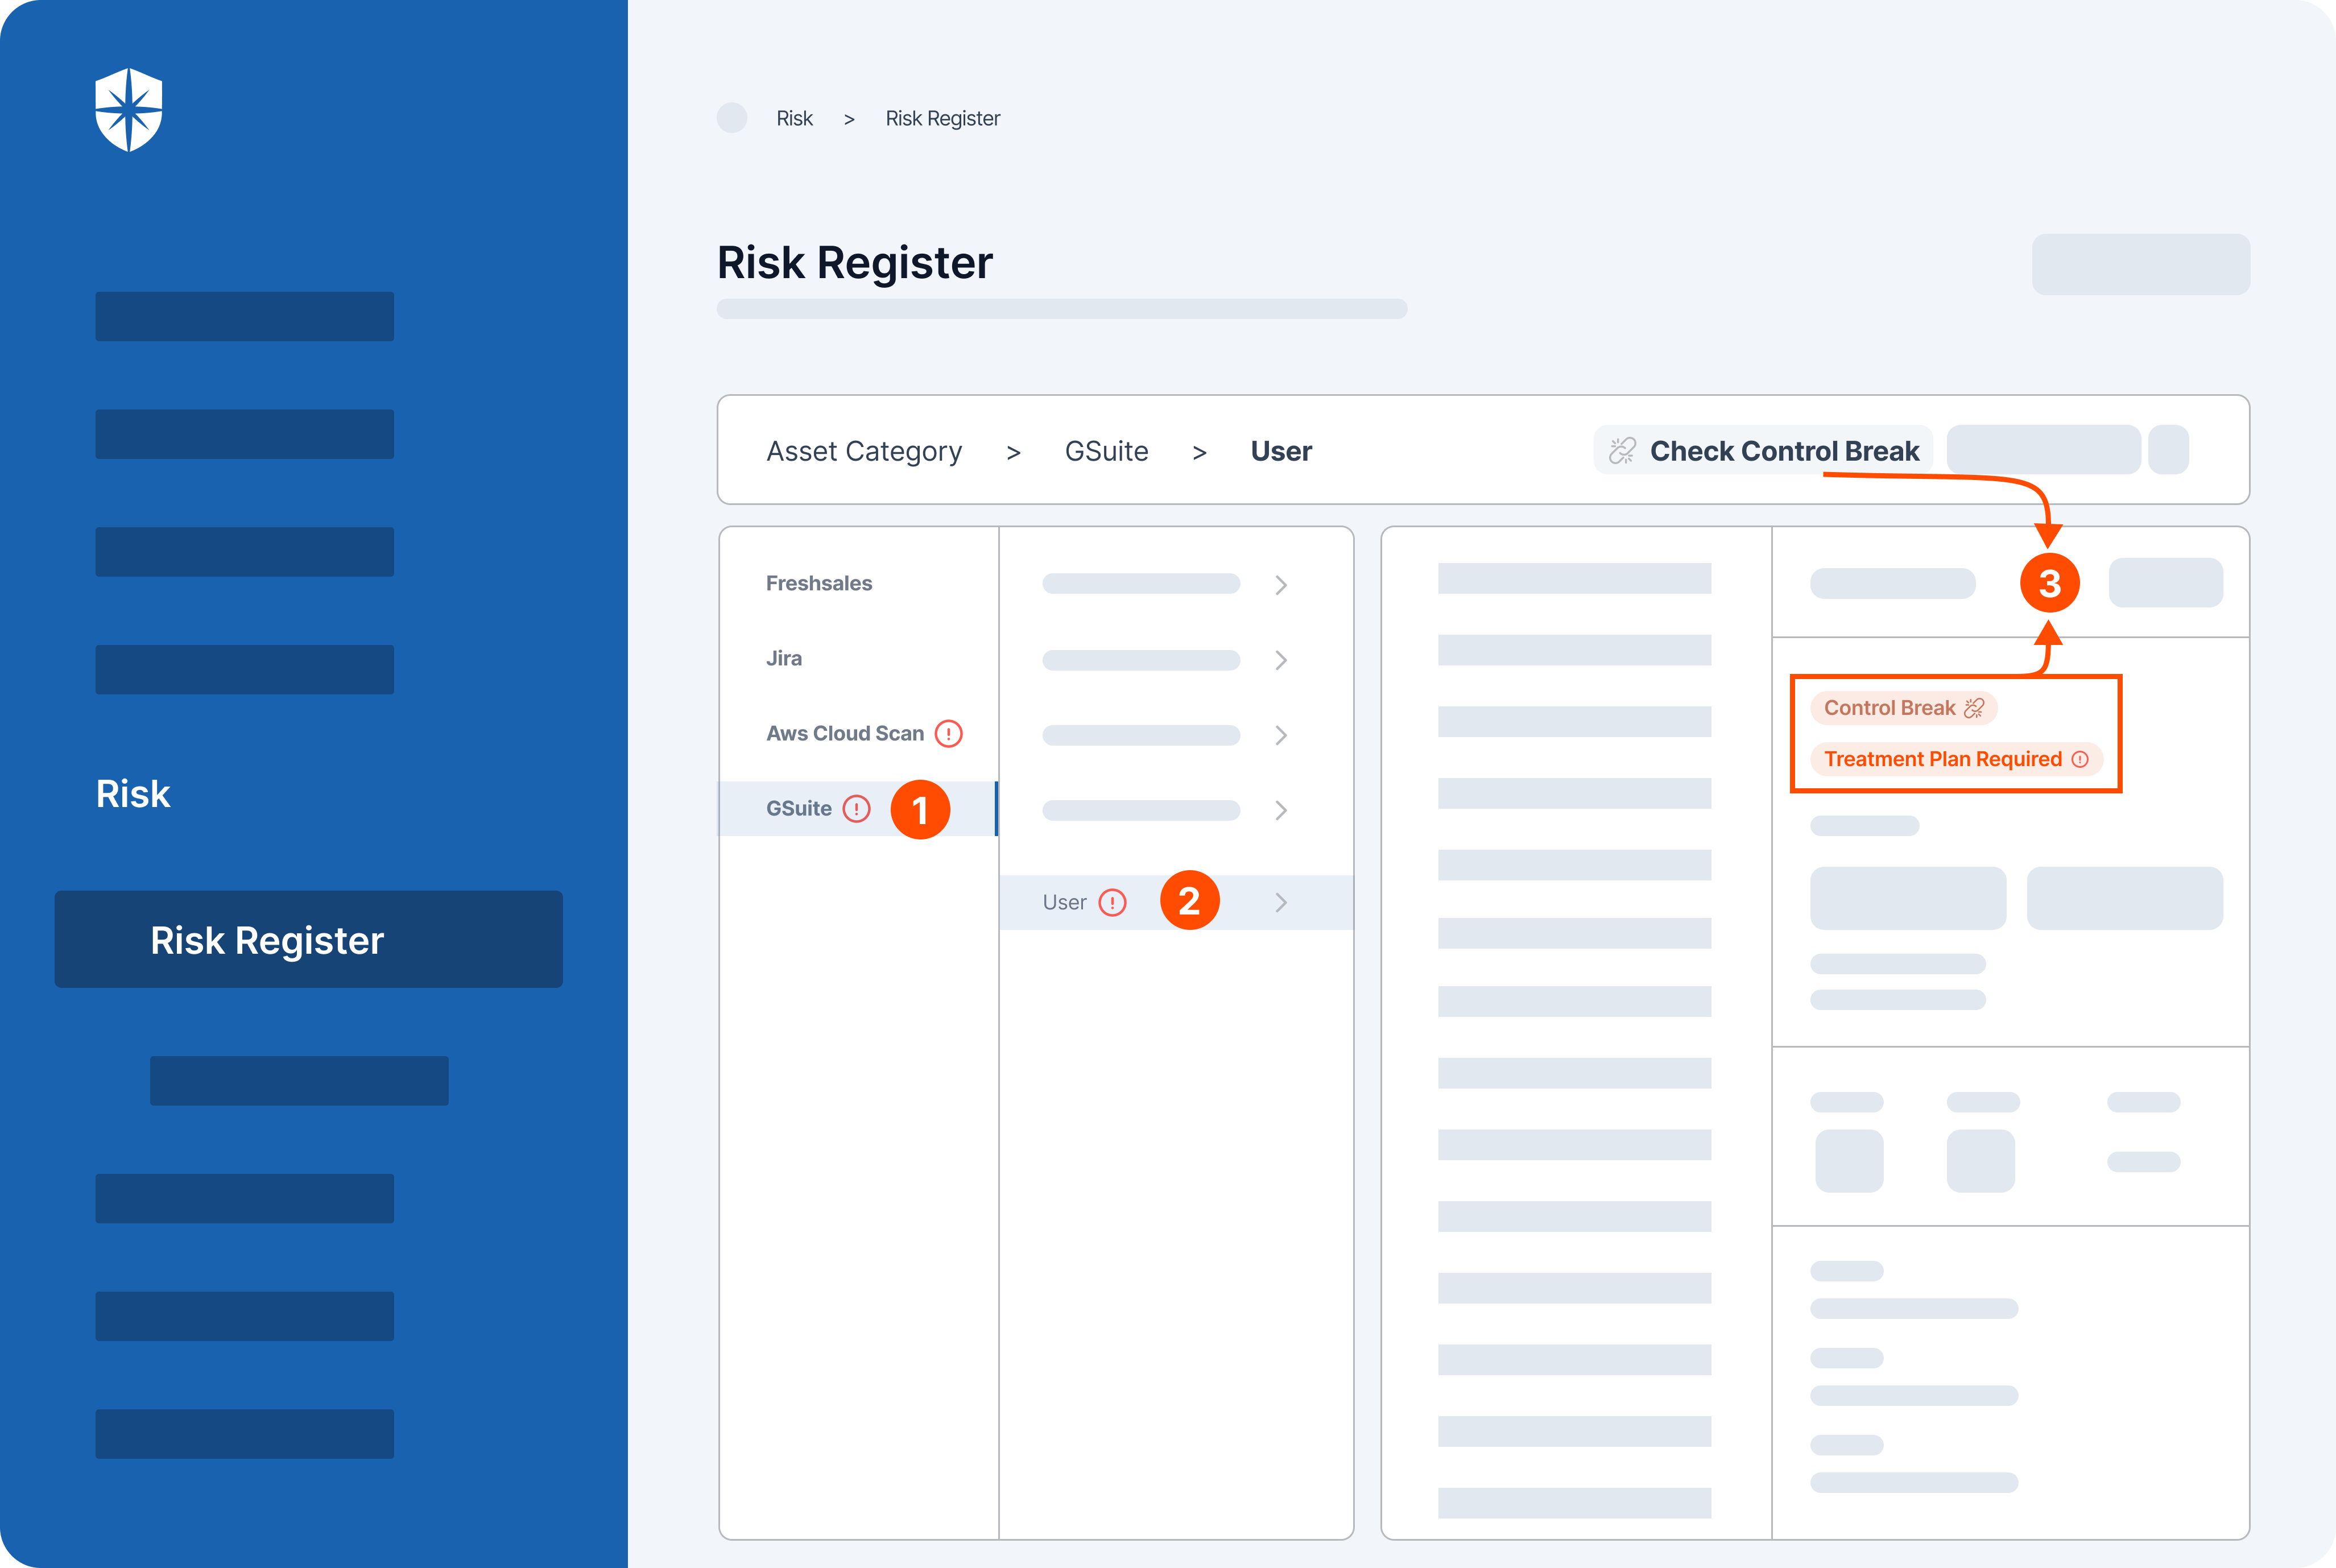 Once integrated, it continuously monitor and pulls data into a Risk Register, where misconfigurations and user behaviors that could cause breaches are flagged in real-time